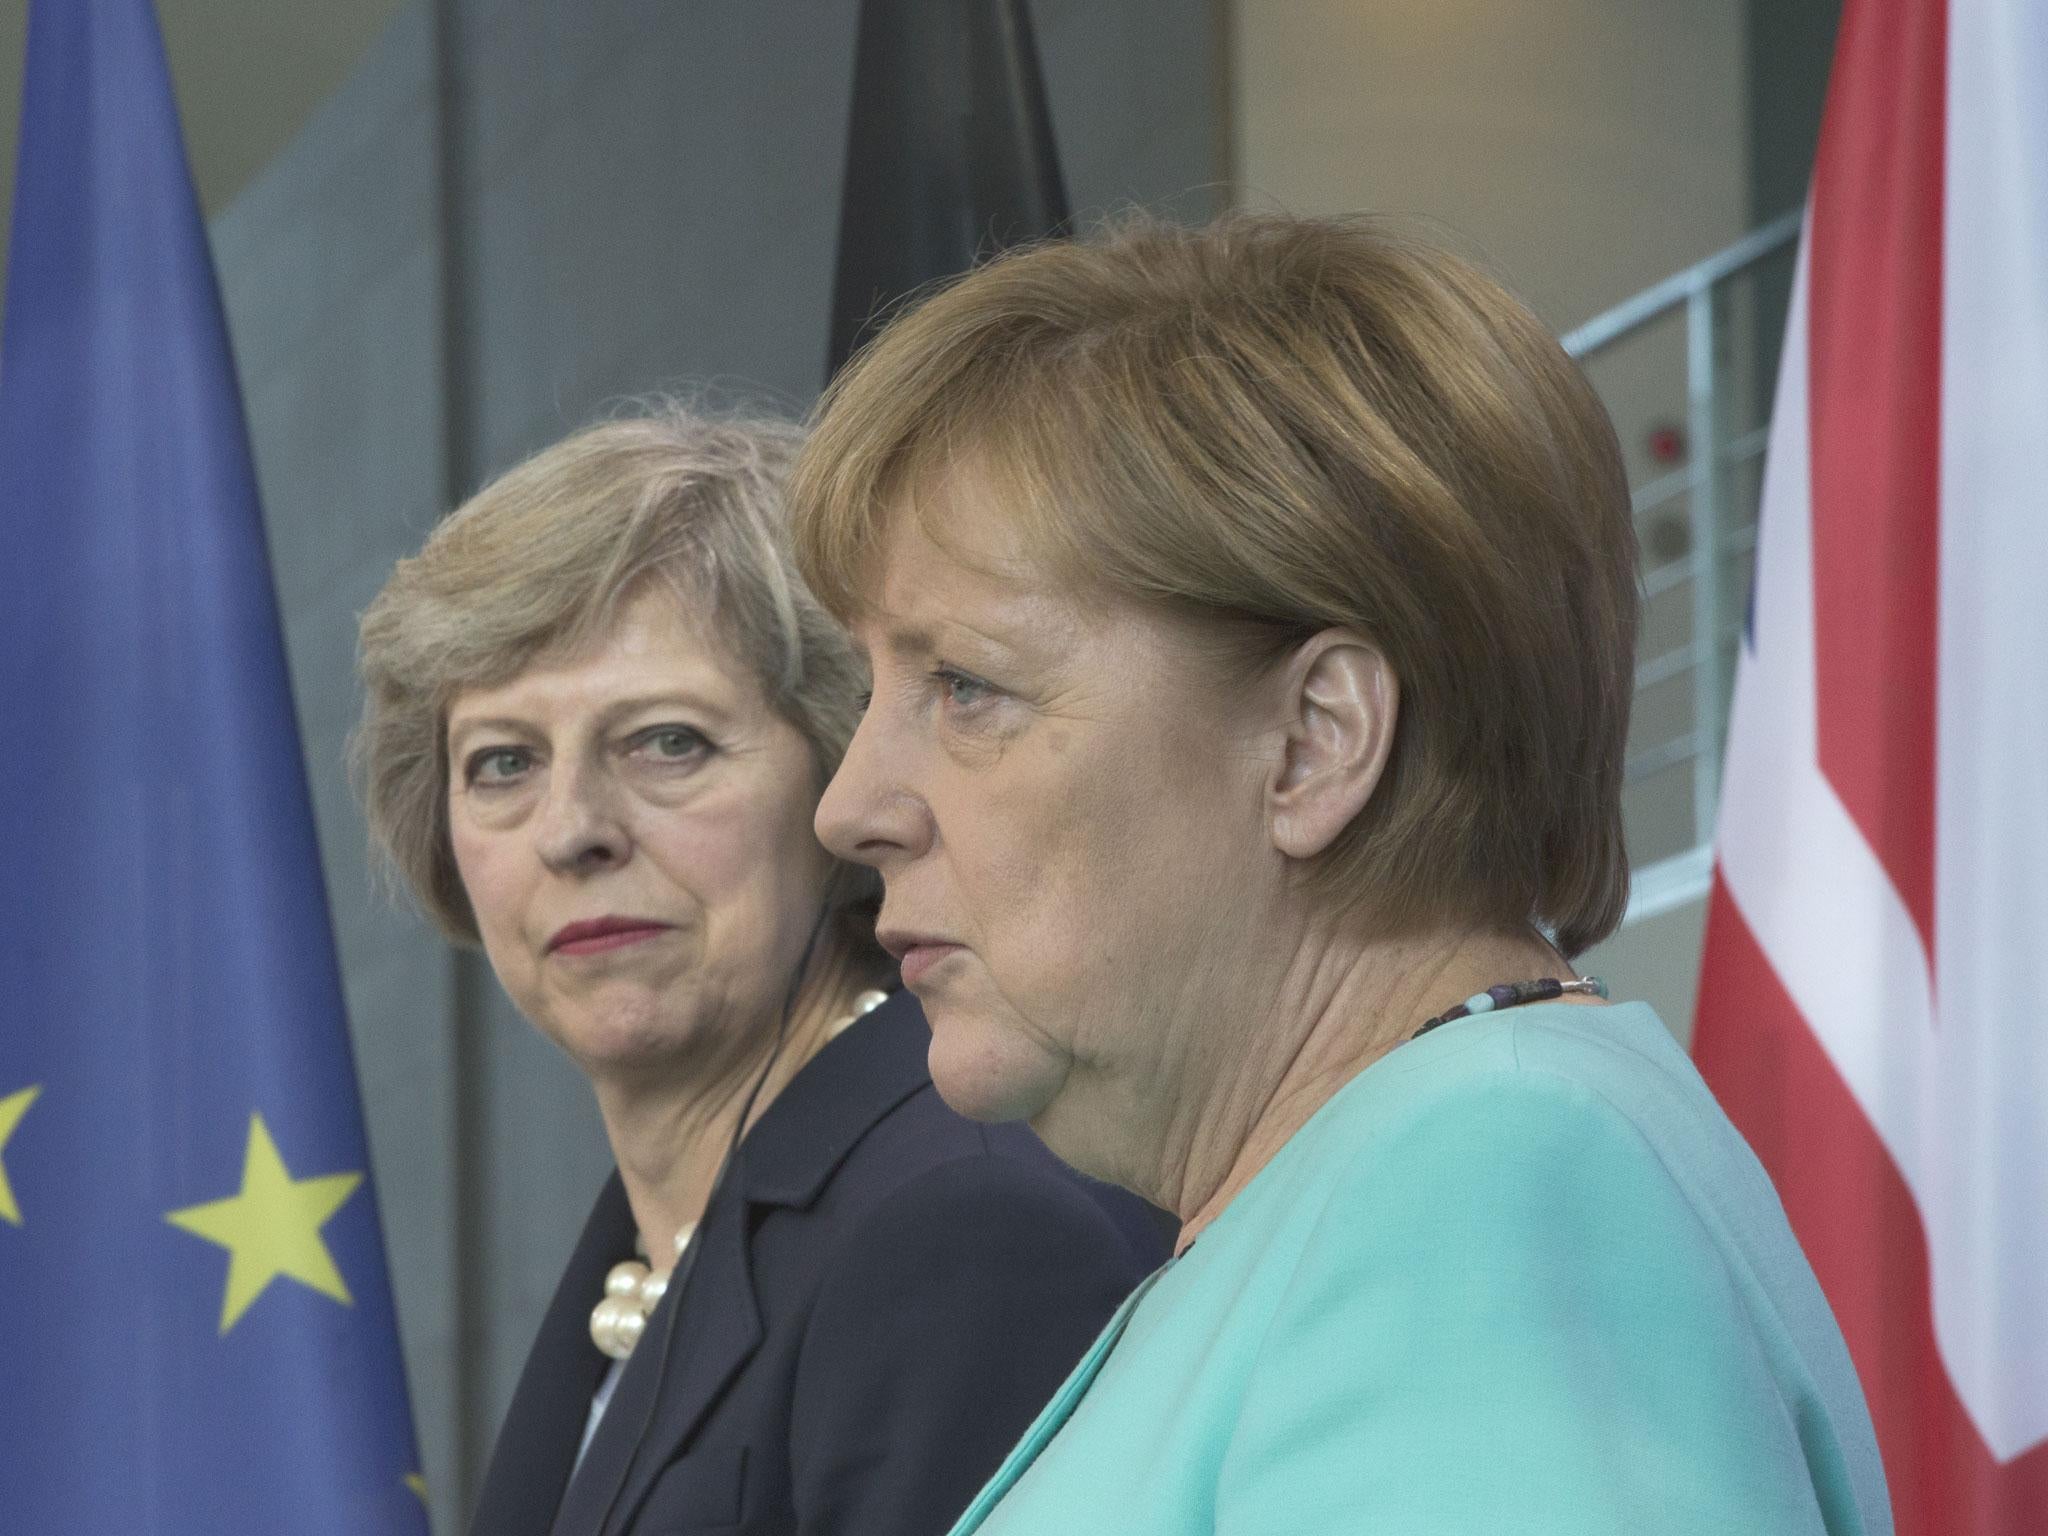 May and Merkel both made it into the ST's sidebar of childless shaming